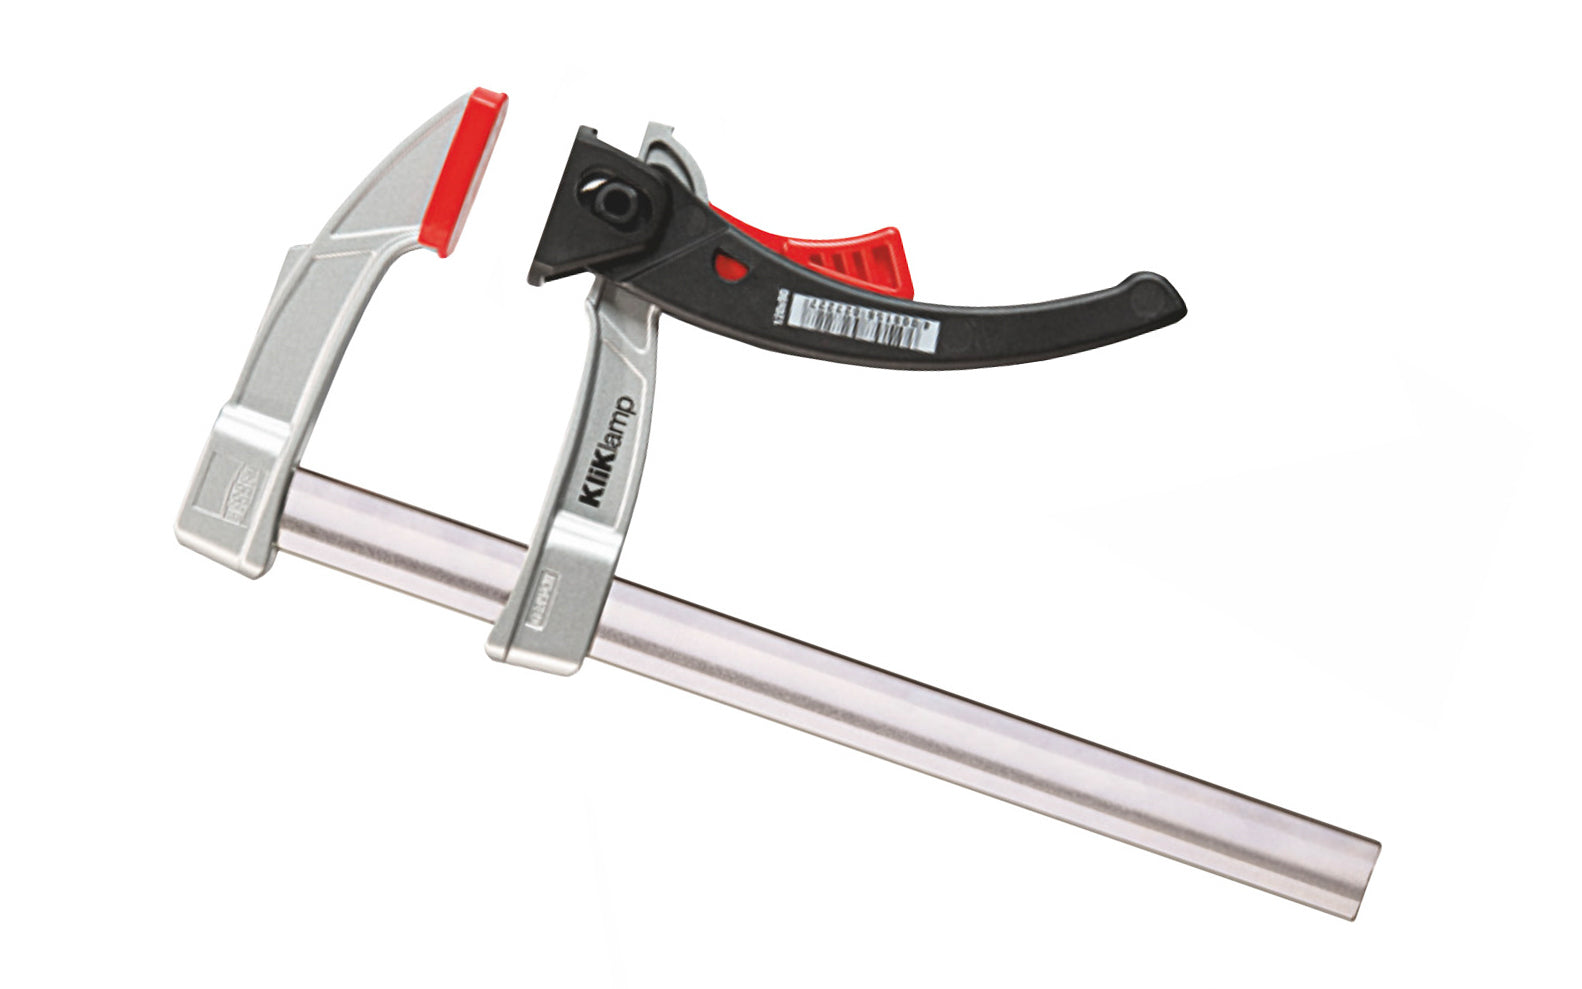 Bessey 8" "KliKlamp" Light Duty Lever Clamp KLI3.008 creates up to 260 lbs. of clamping force. Positive locking ratchet action. Made of sturdy magnesium which makes it lightweight & strong. Fixed arm with v-grooves holds round & angular components firmly in place. 8" clamping capacity - 3" throat depth. Made in Germany